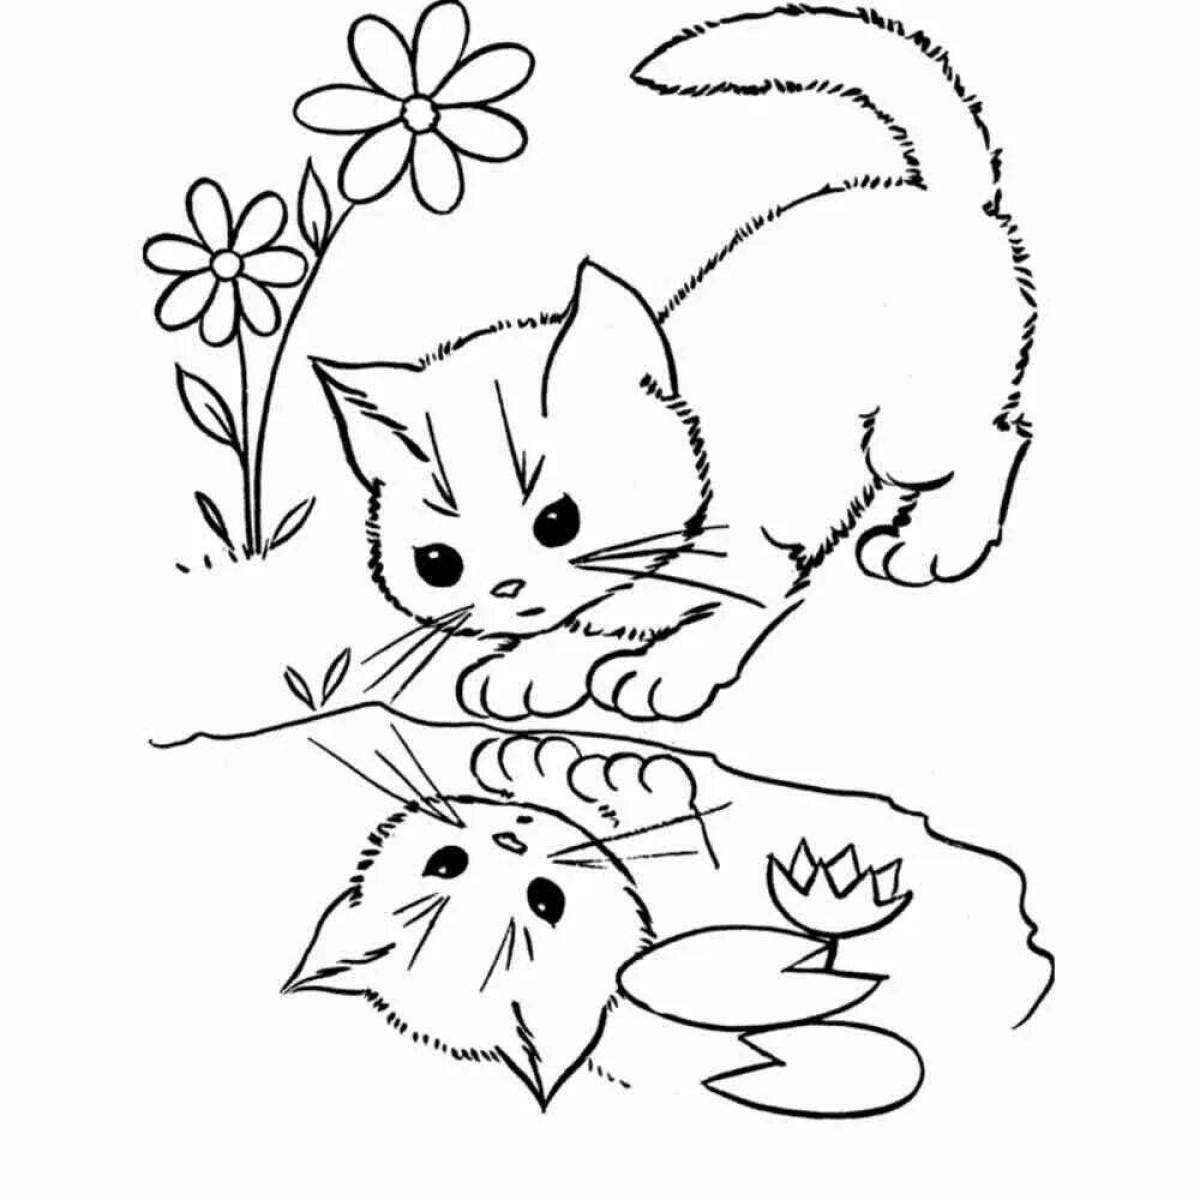 Exquisite coloring book for children 5-6 years old cats